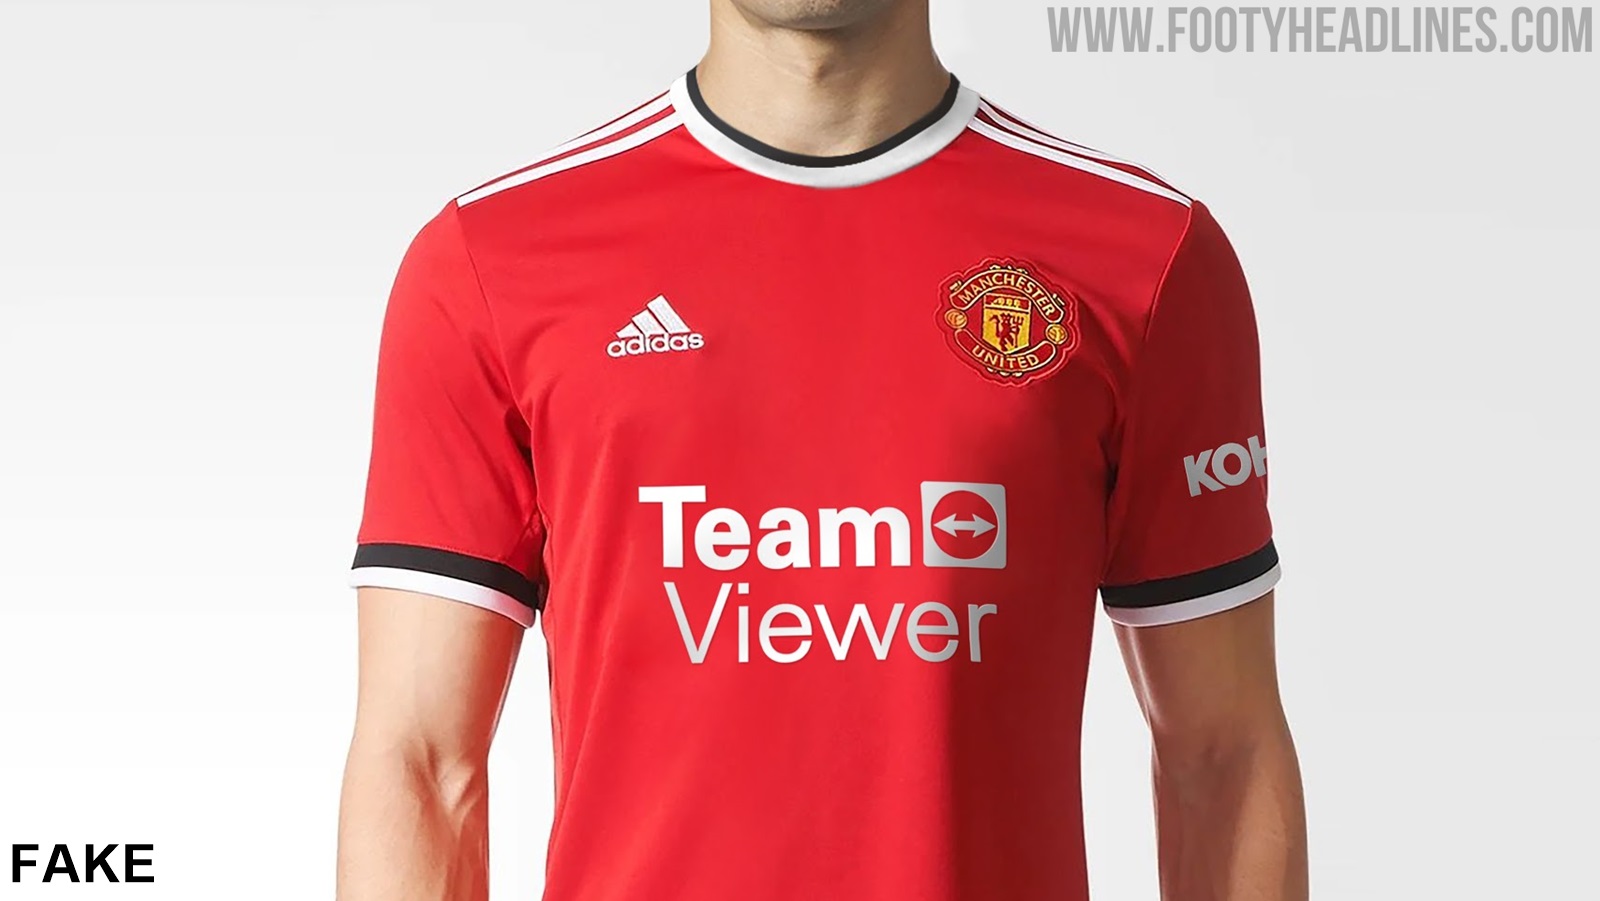 'TeamViewer' Logo To Look Like This On Manchester United's Kits ...